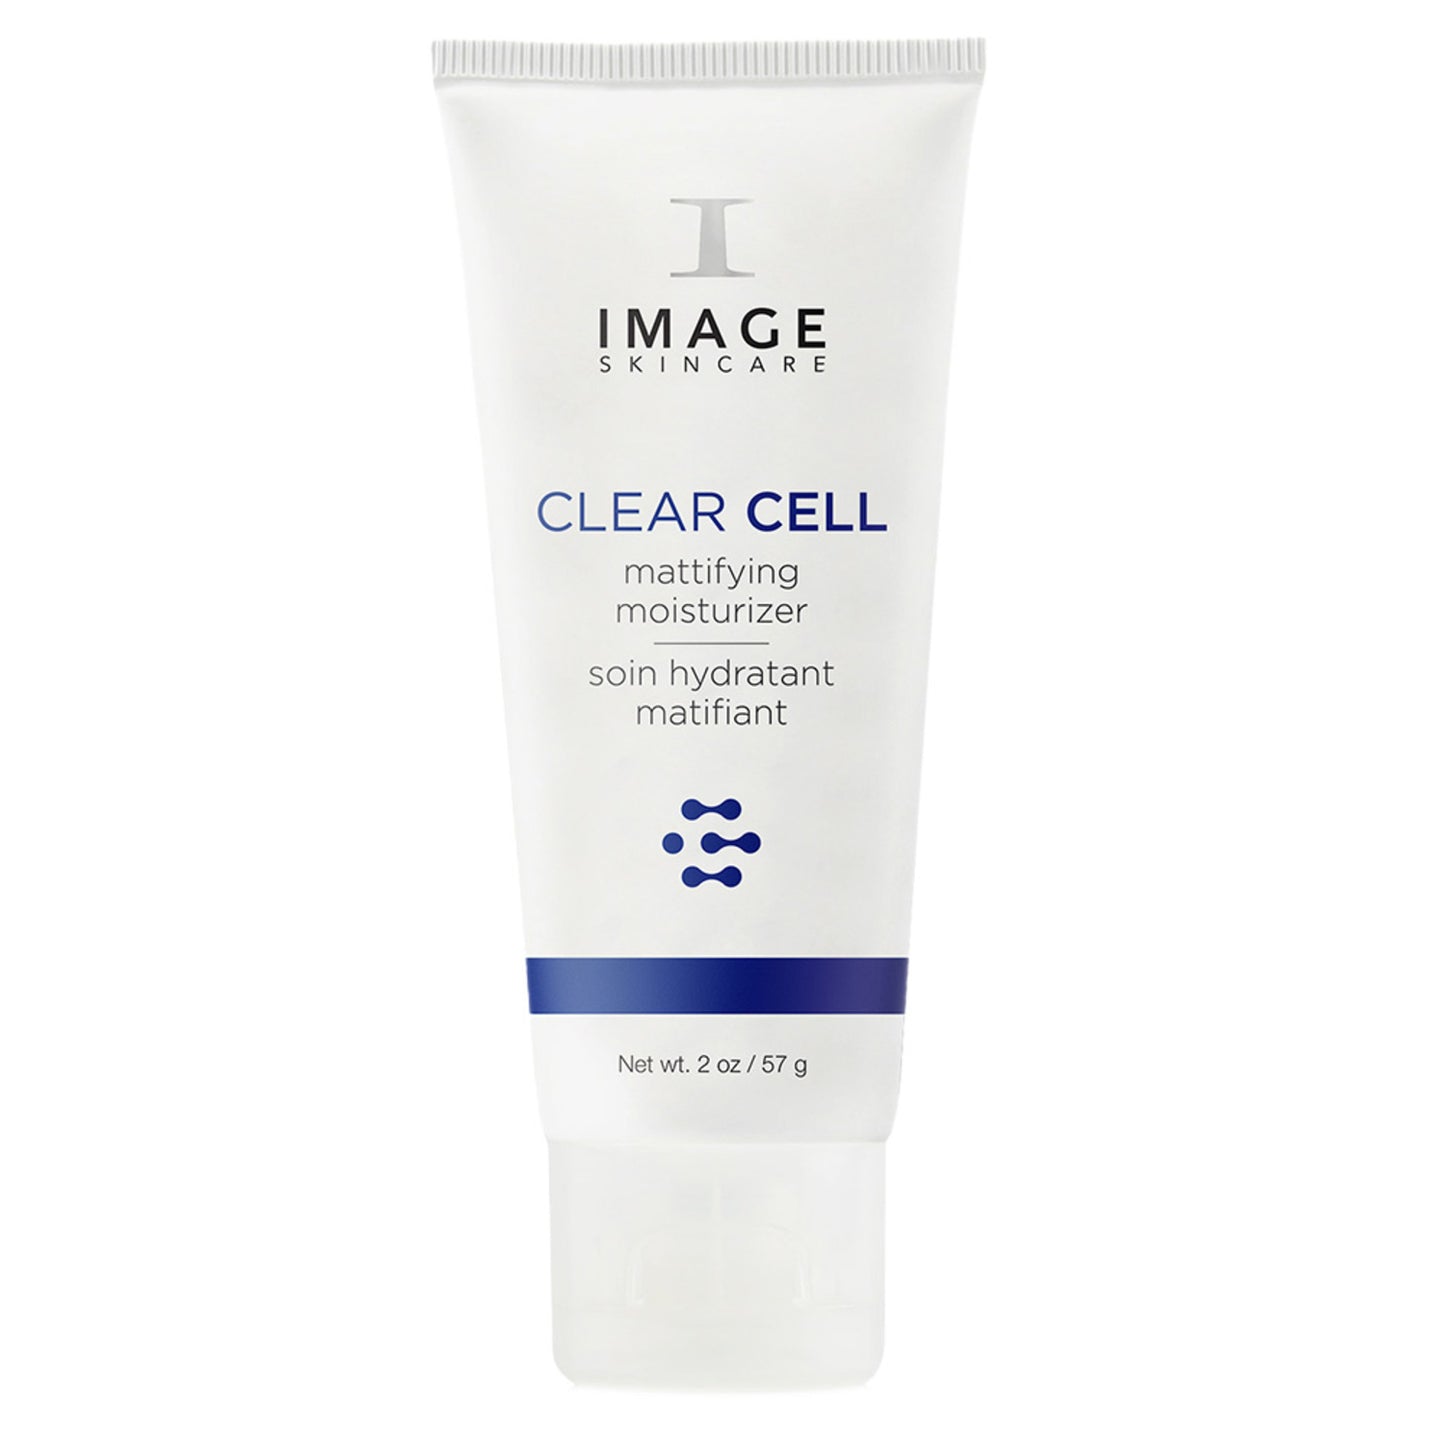 Image Skincare Clear Cell Mattifying Moisturizer (Oily Skin)